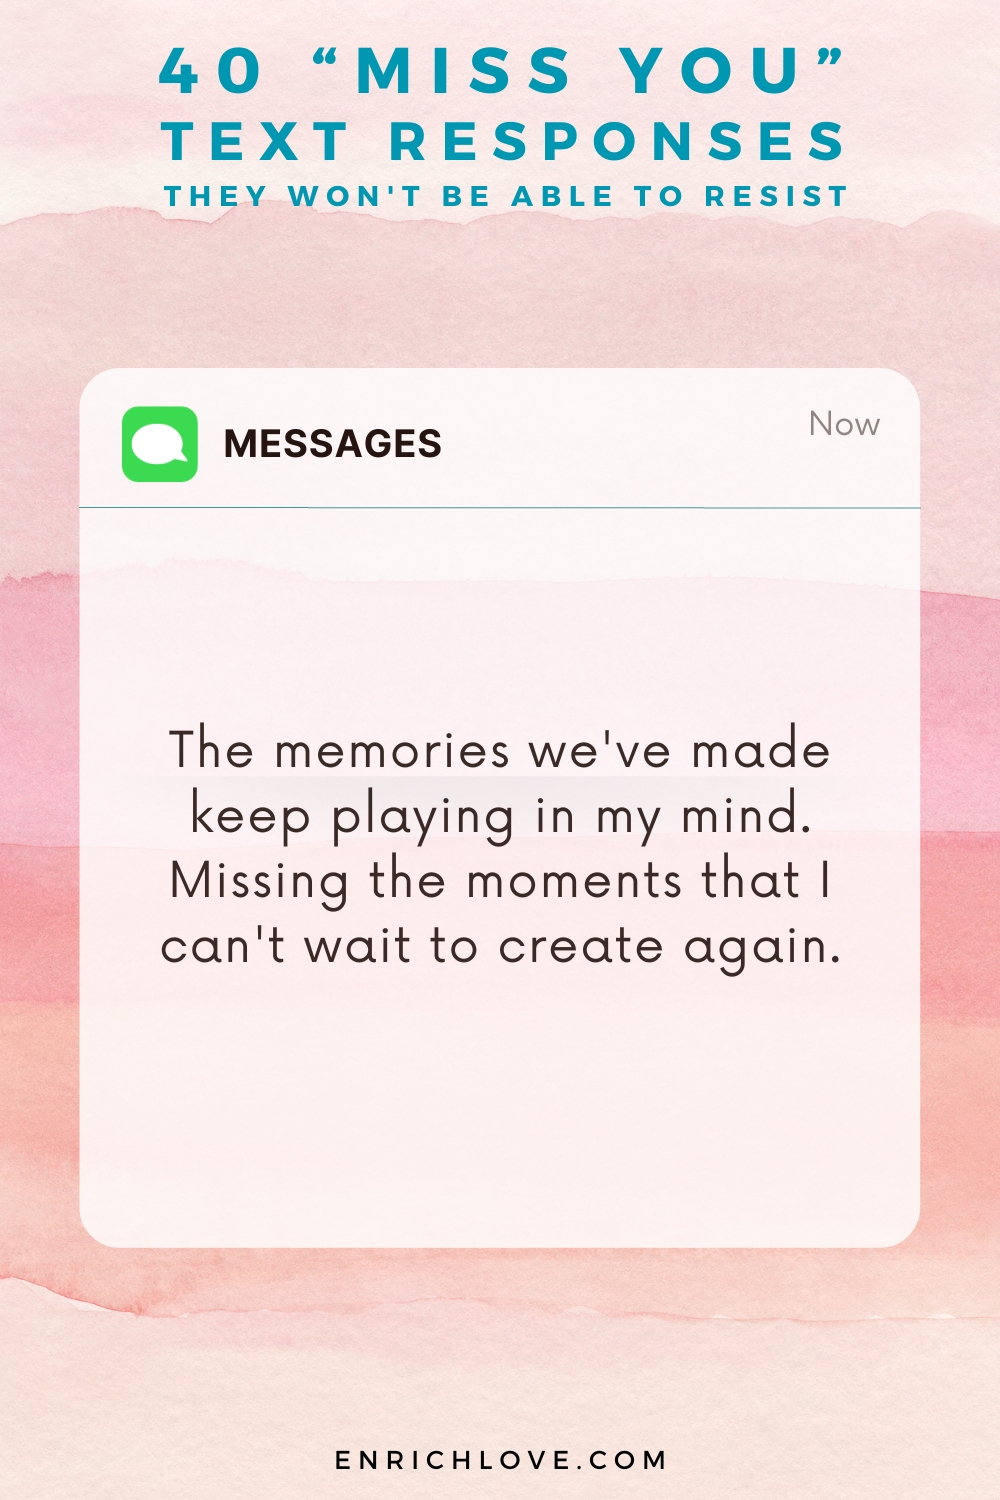 40 'Miss You' Text Responses -The memories we've made keep playing in my mind. Missing the moments that I can't wait to create again.